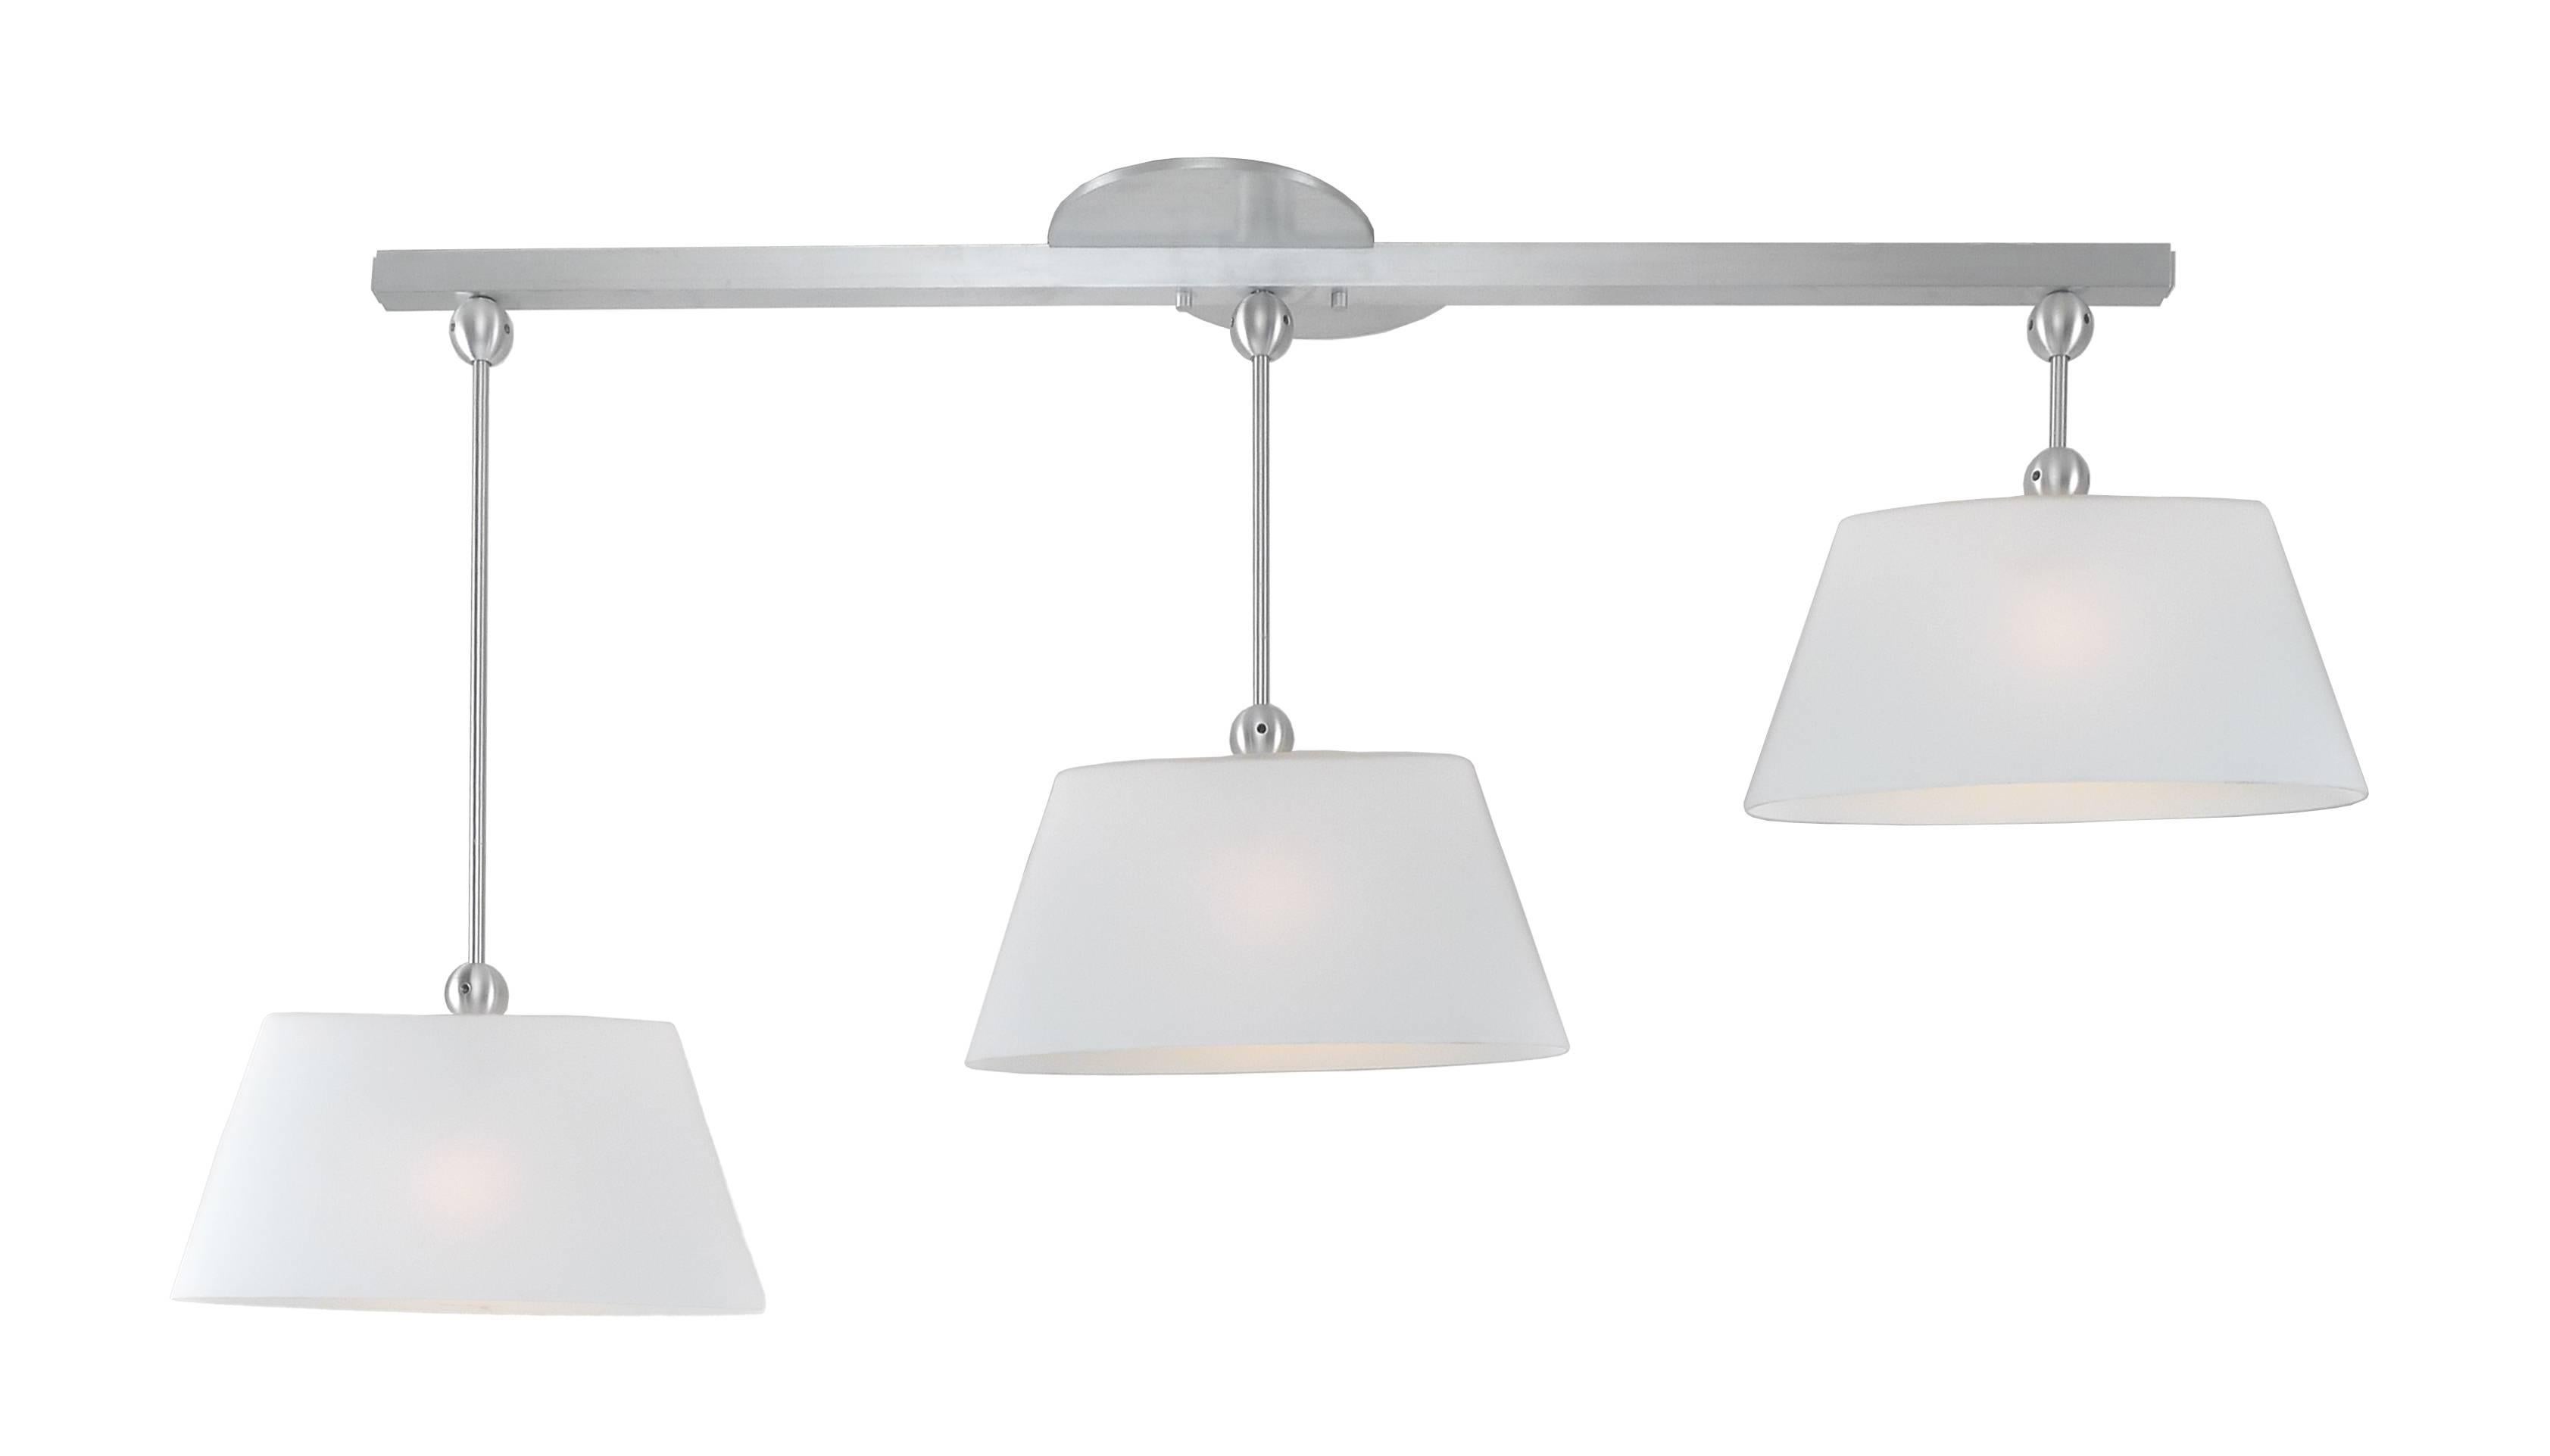 Gia pendant light, shades of white opal metal details are satin aluminum. Incandescent lamping. Measures: 52 inches long.

Architect, Sandy Littman of Duesenberg LTD.  and The American Glass Light Company have been making beautiful objects and